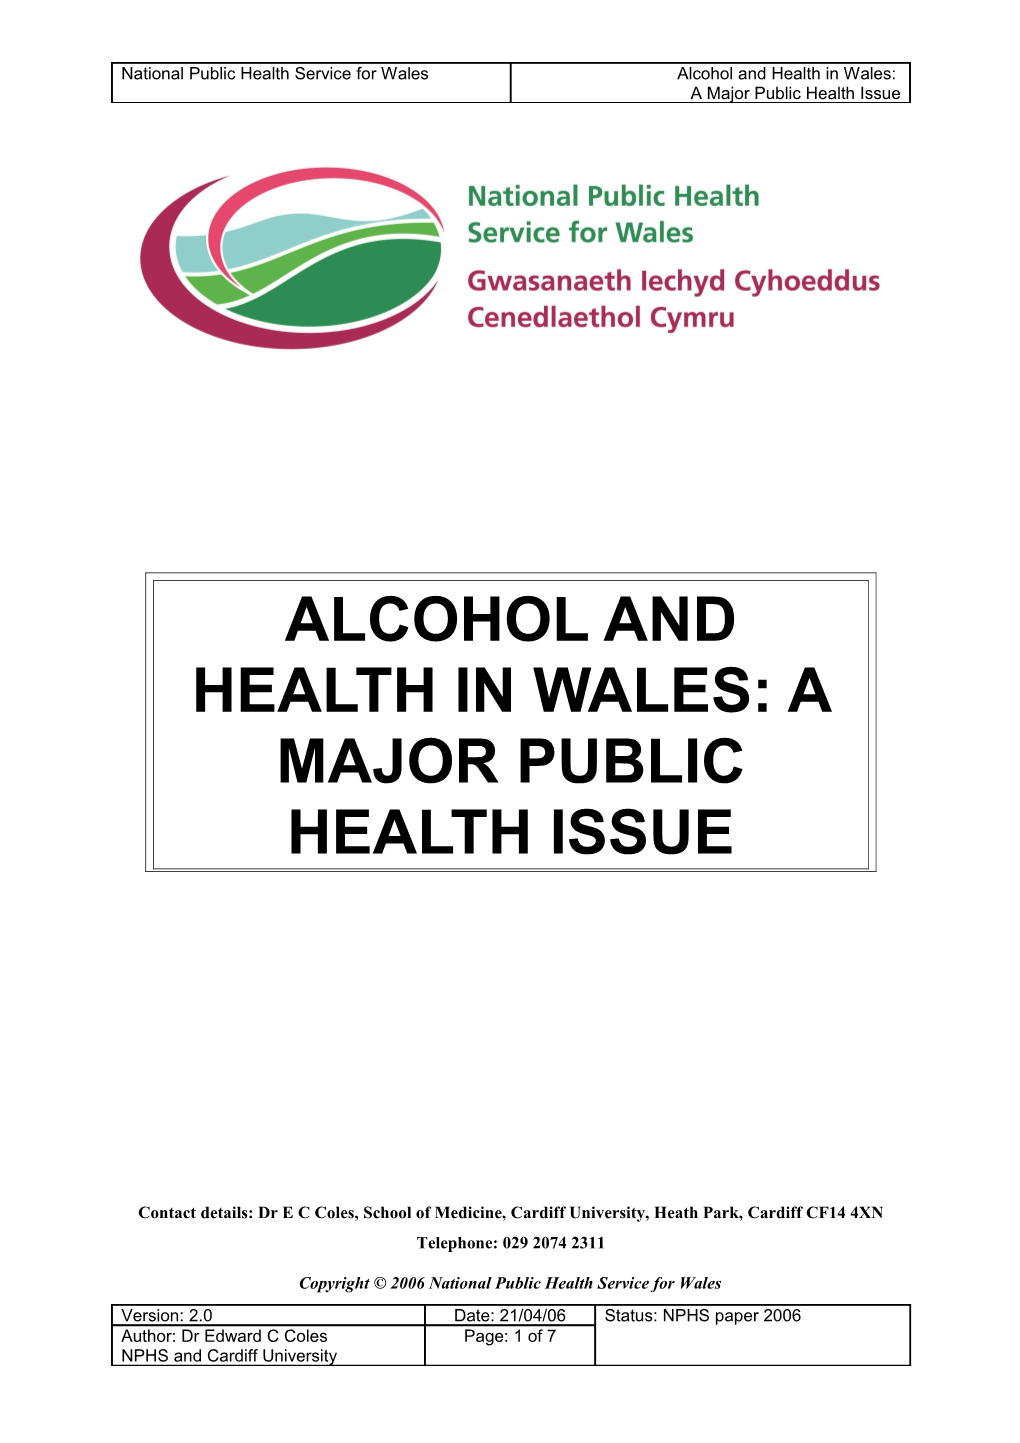 Alcohol and Health in Wales: a Major Public Health Issue